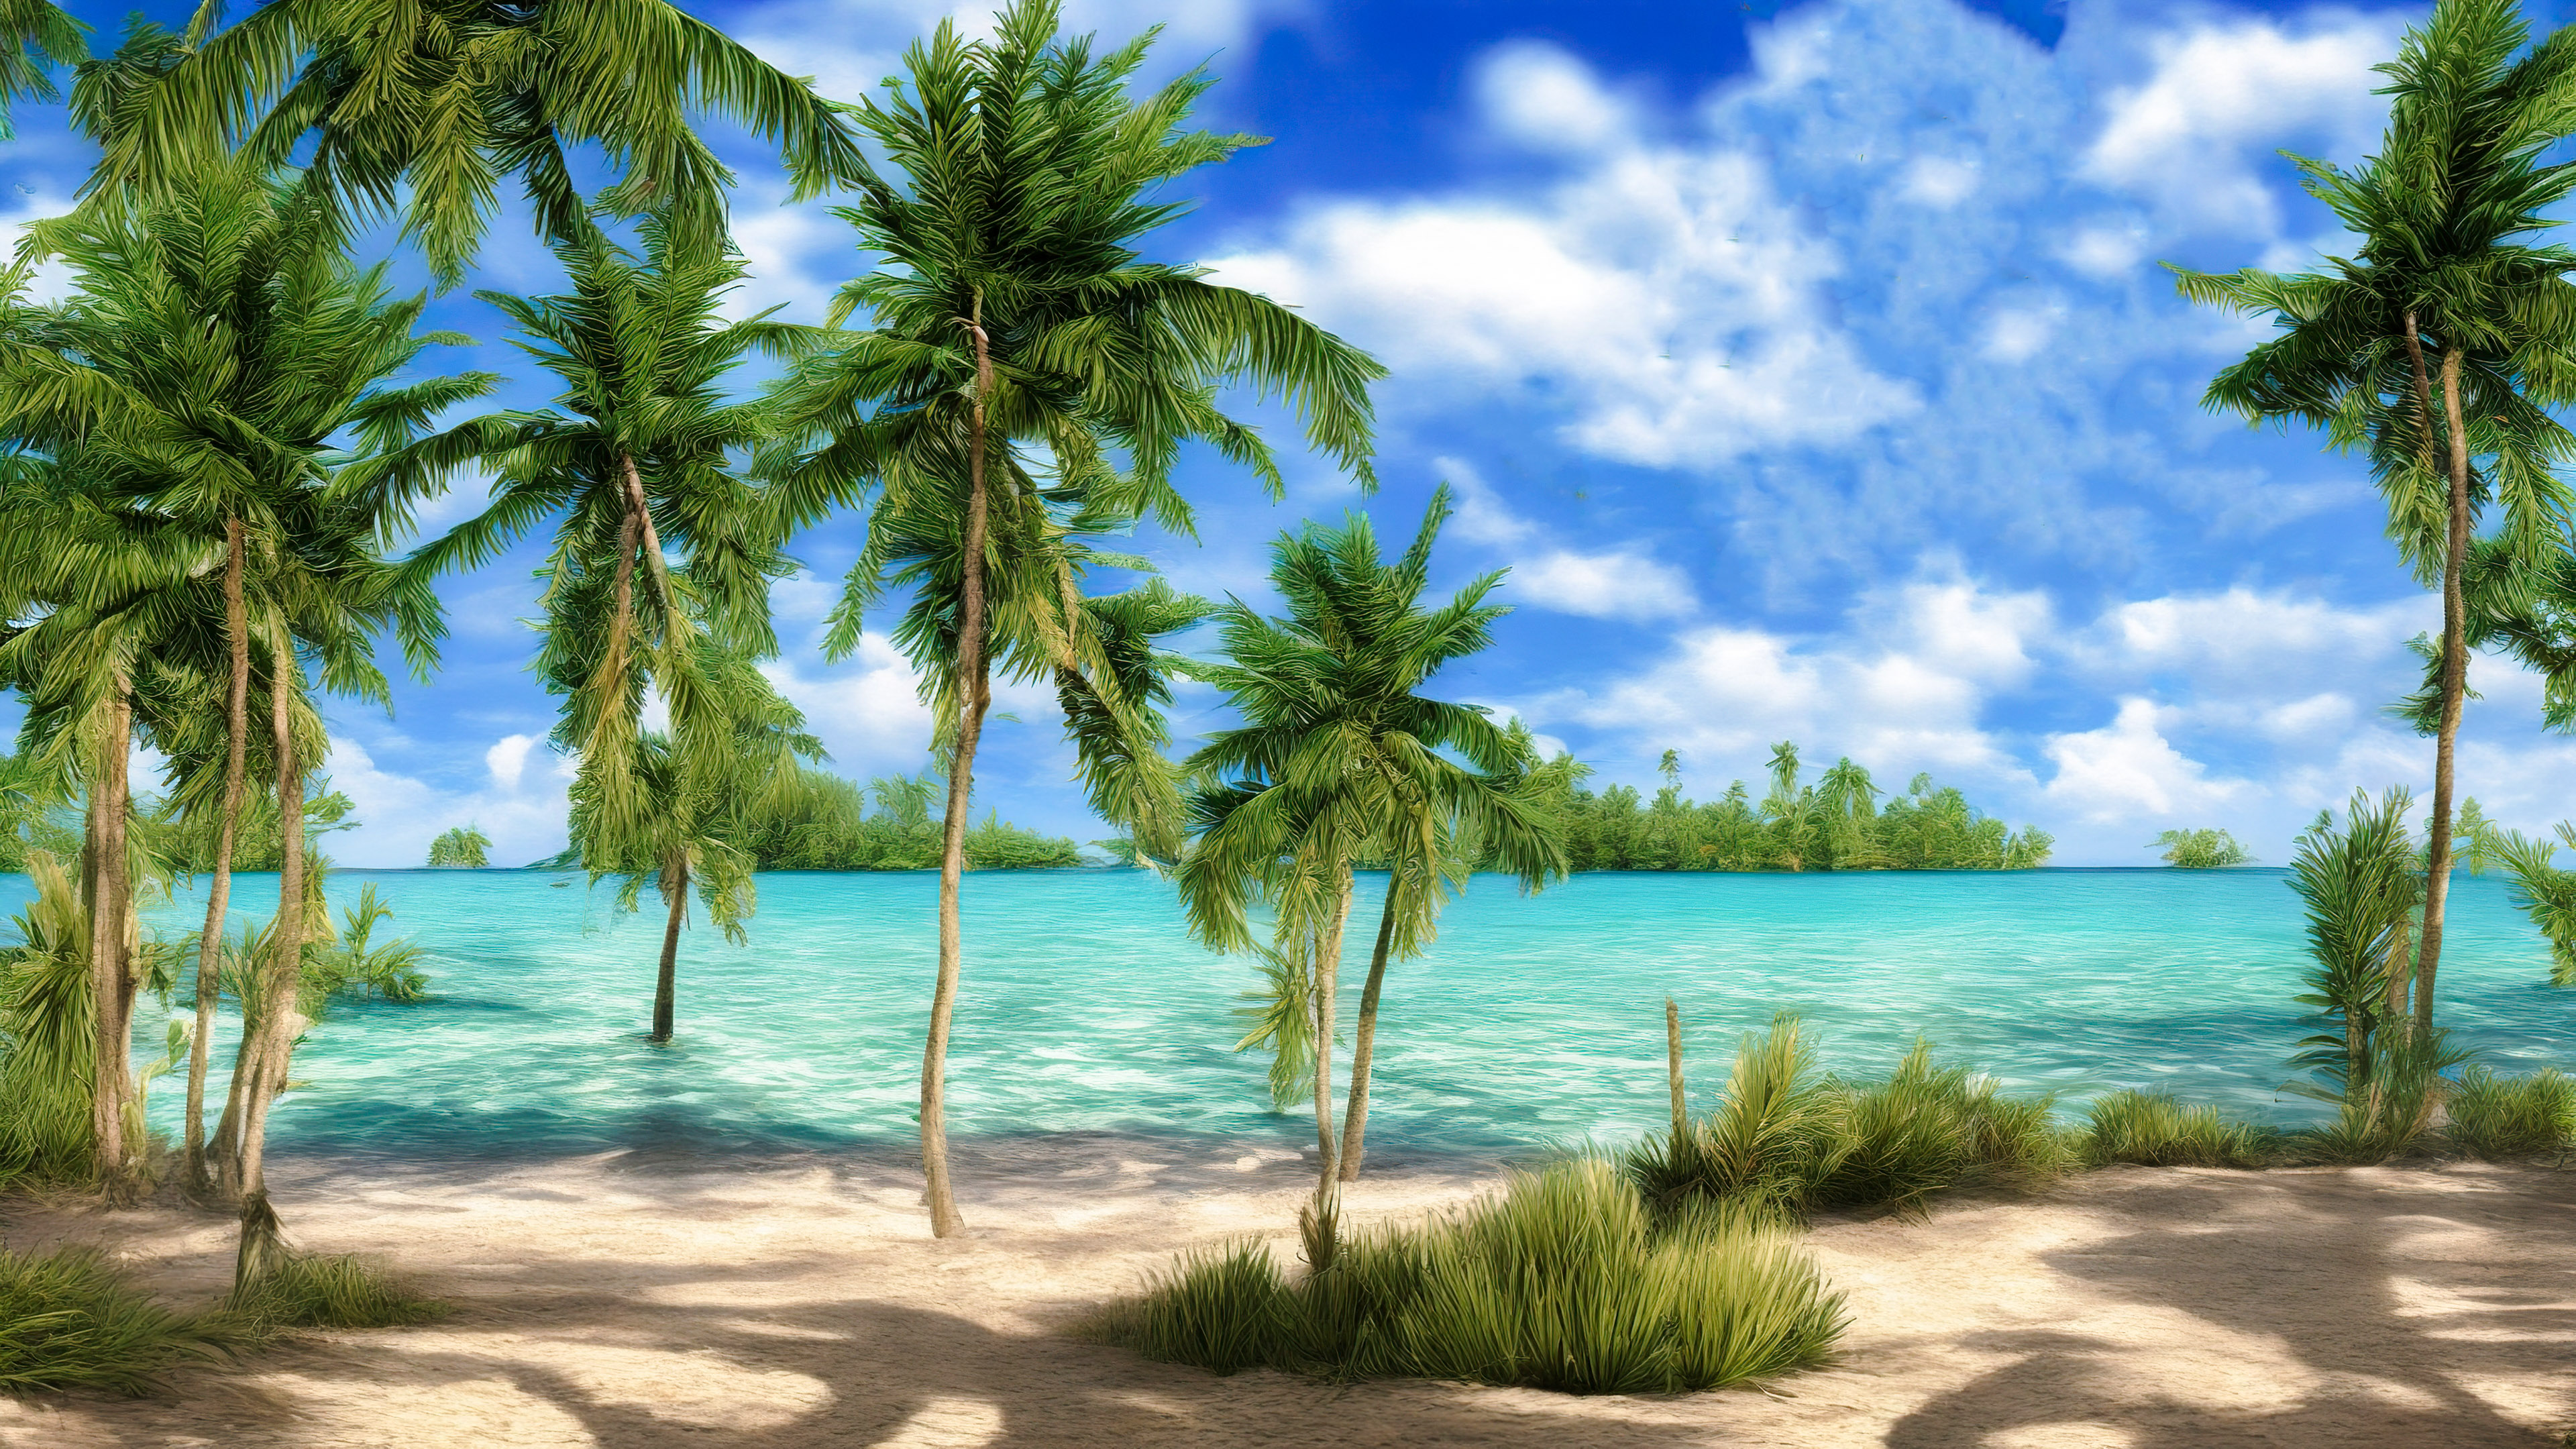 Download this enchanting 4K nature wallpaper featuring a tranquil beach with crystal-clear turquoise waters and palm trees swaying in the breeze.